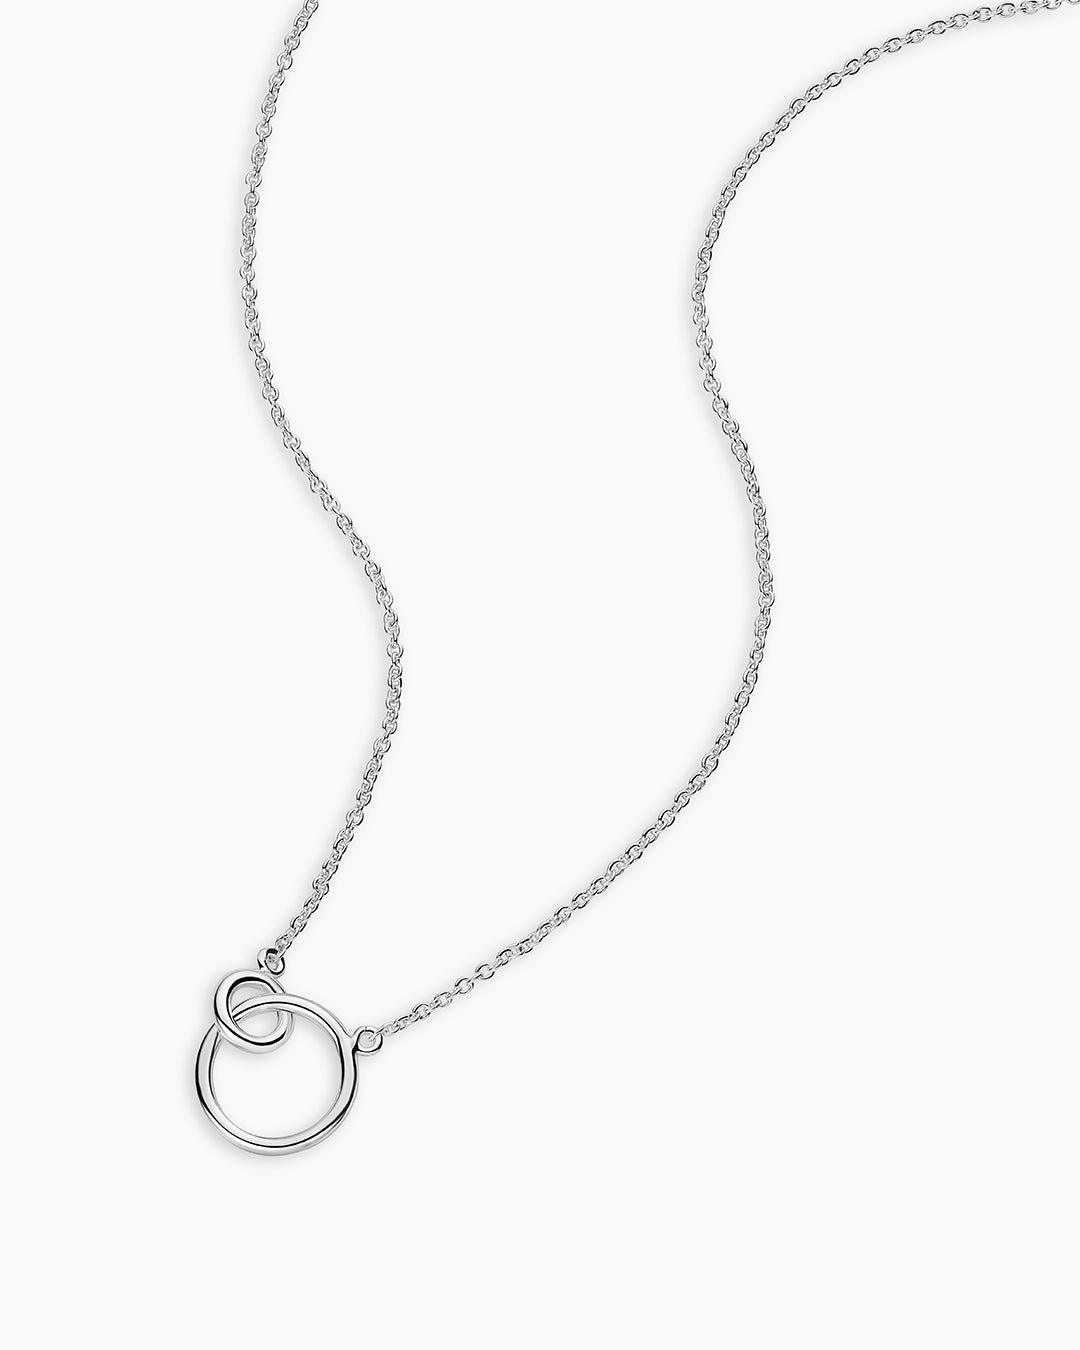 Wilshire Charm Adjustable Necklace || option::Silver Plated